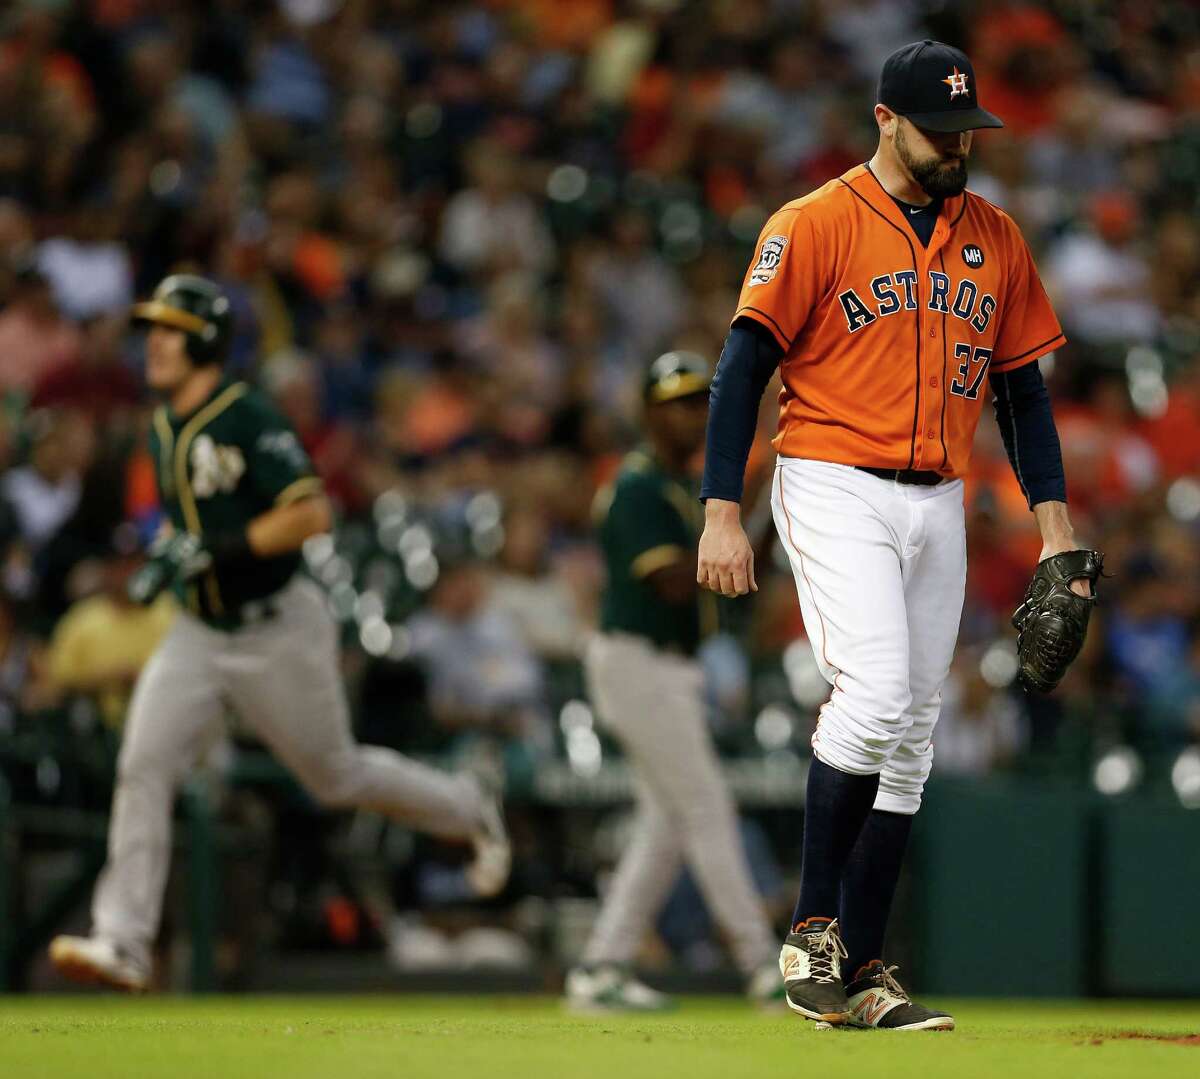 Astros relief pitcher Pat Neshek, right, can't bear to watch as the Athletics' Danny Valencia rounds the bases after hitting a decisive two-run homer in the eighth inning Friday night at Minute Maid Park.